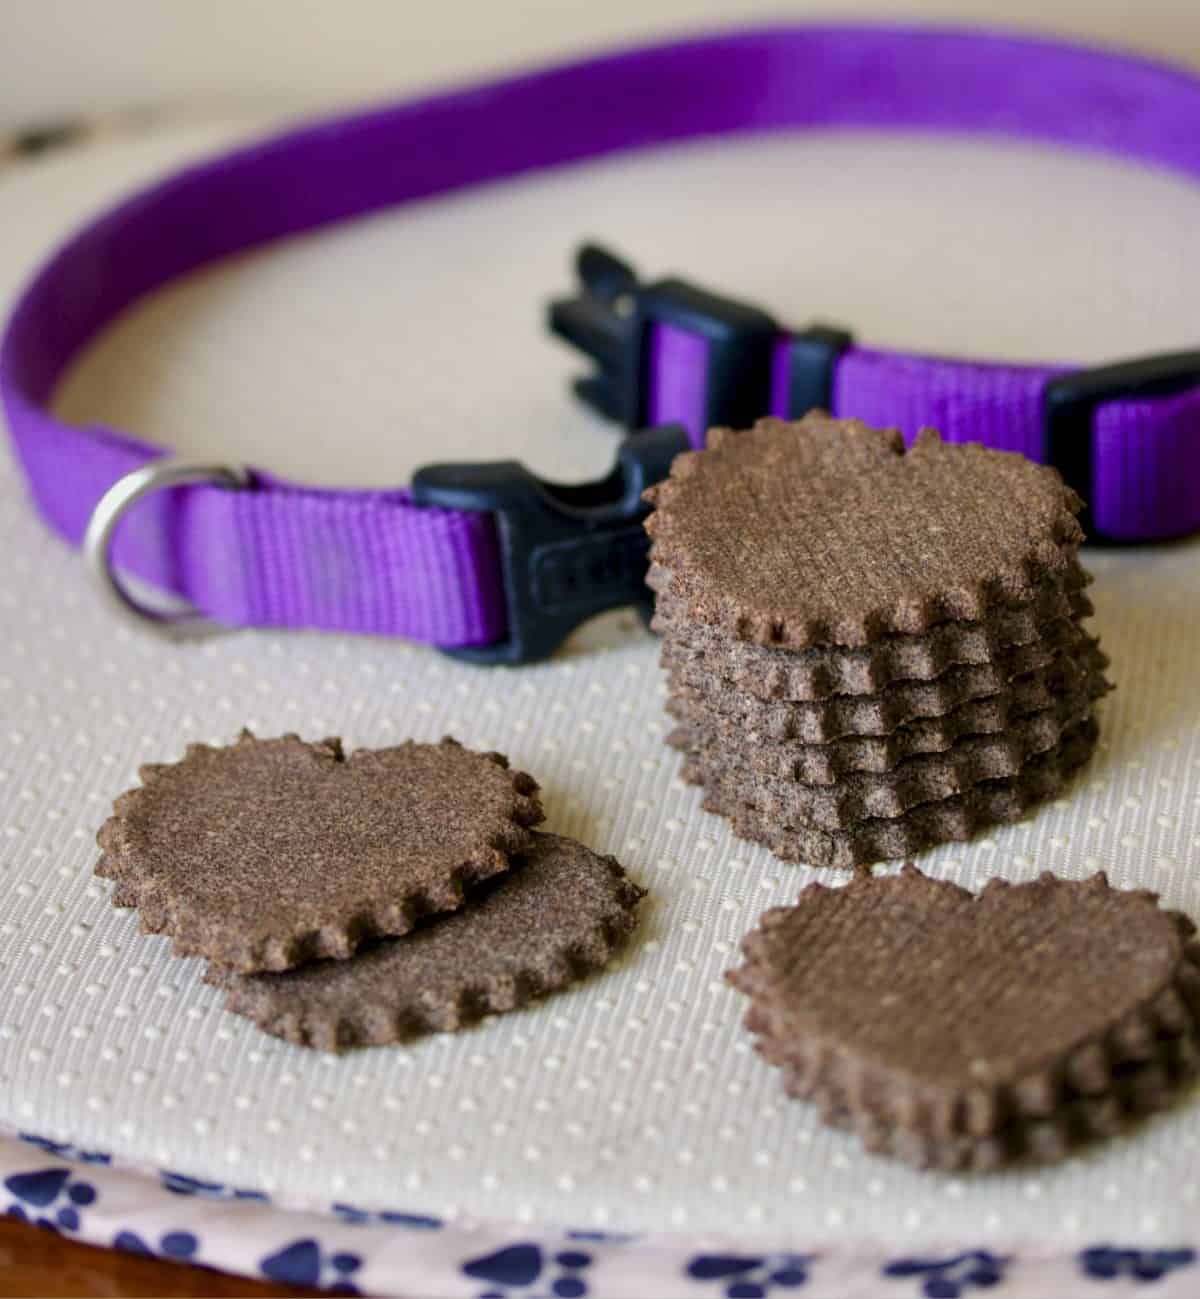 Purple dog collar.
Heart shaped dog biscuits are best gift for gifting your best friend.
